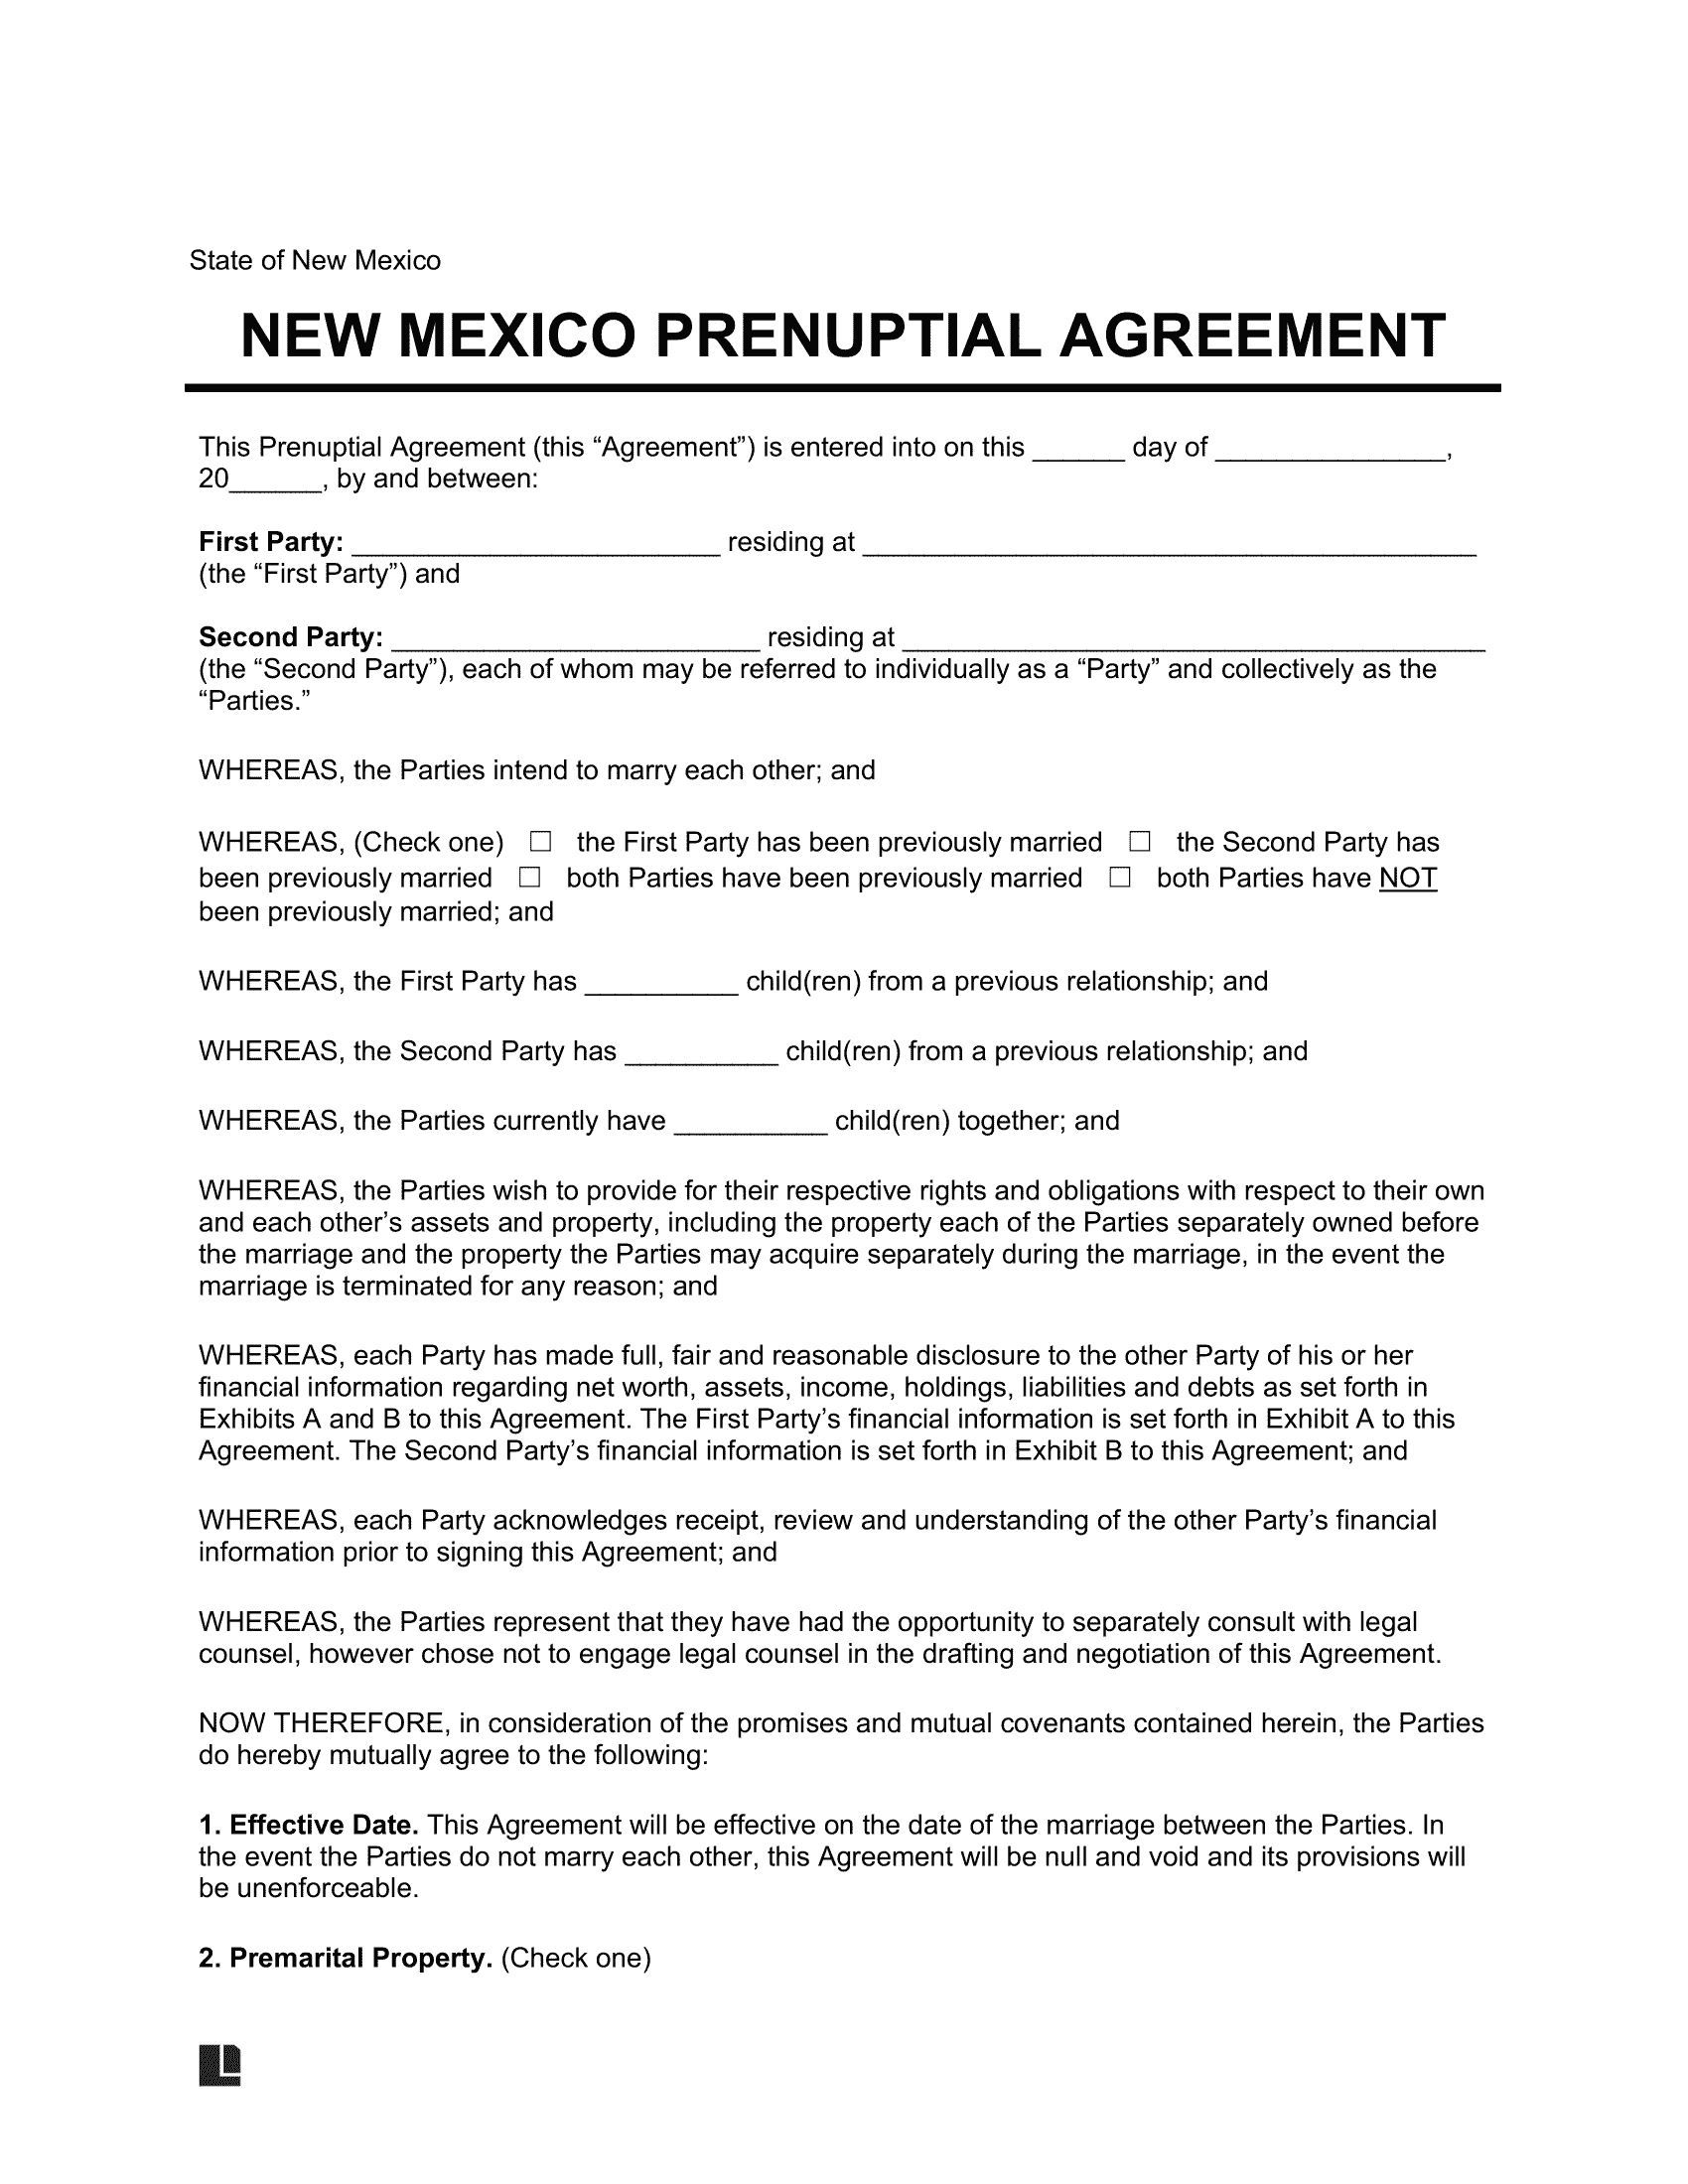 New Mexico Prenuptial Agreement Template